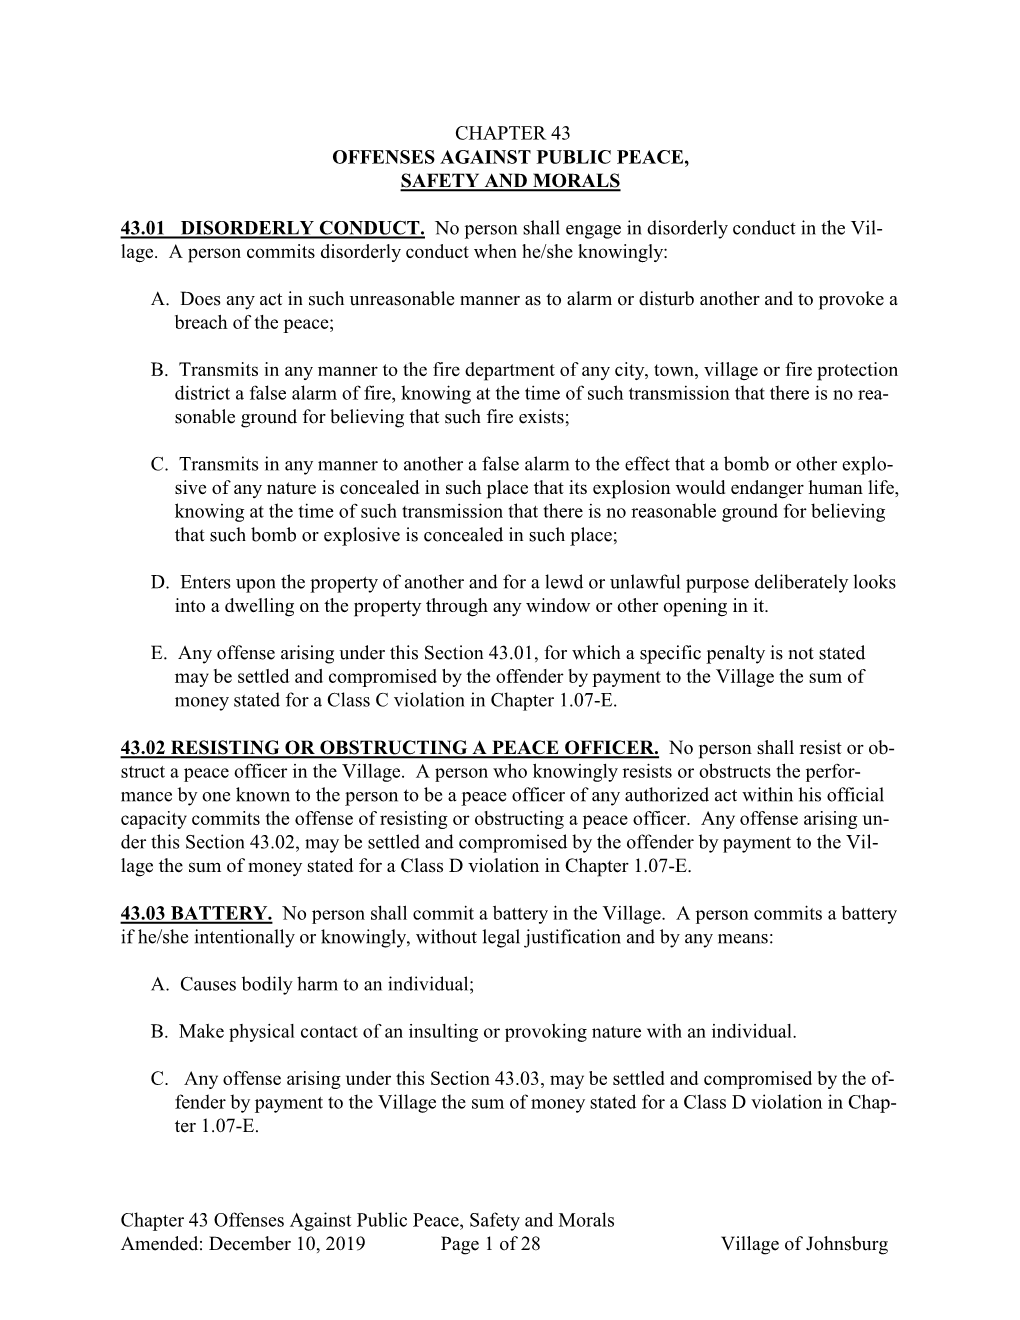 Chapter 43 Offenses Against Public Peace, Safety and Morals Amended: December 10, 2019 Page 1 of 28 Village of Johnsburg